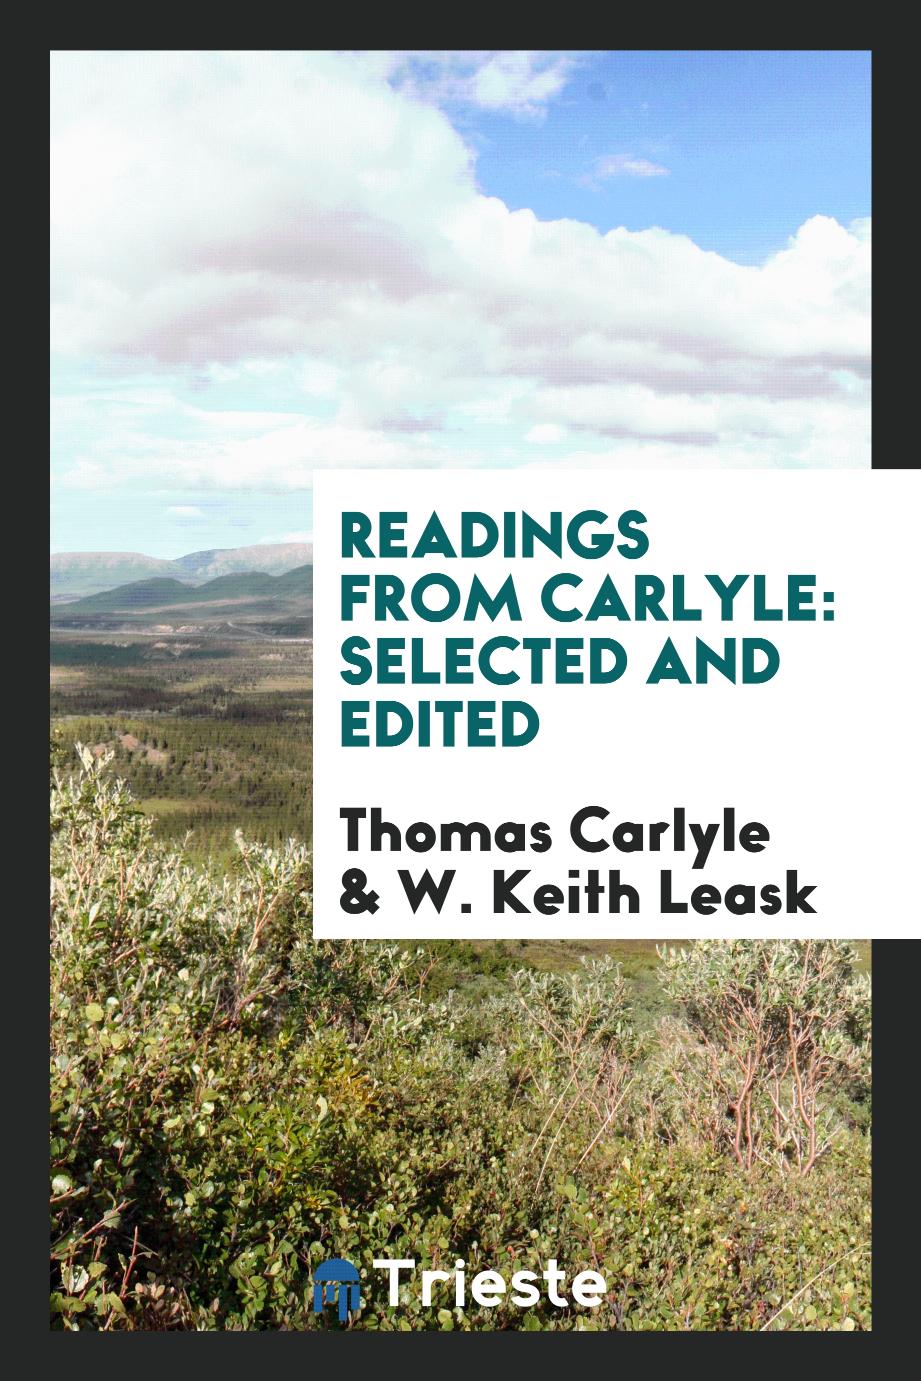 Readings from Carlyle: Selected and Edited